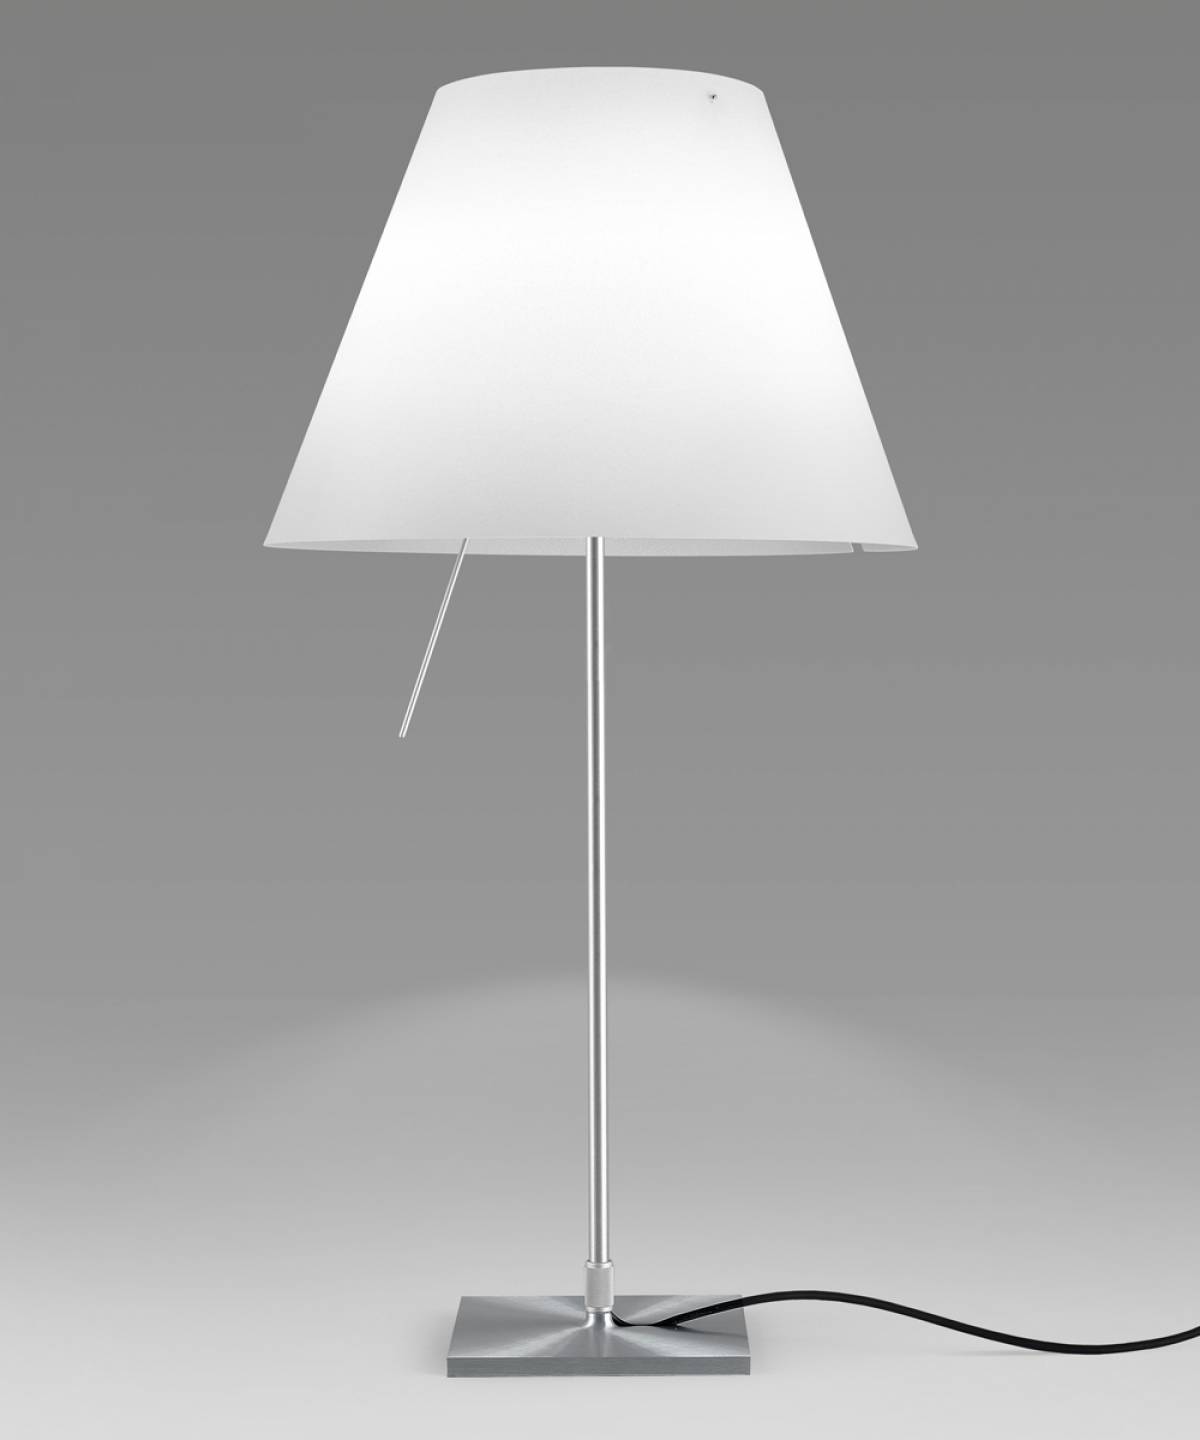 6 Costanza table lamp Luceplan